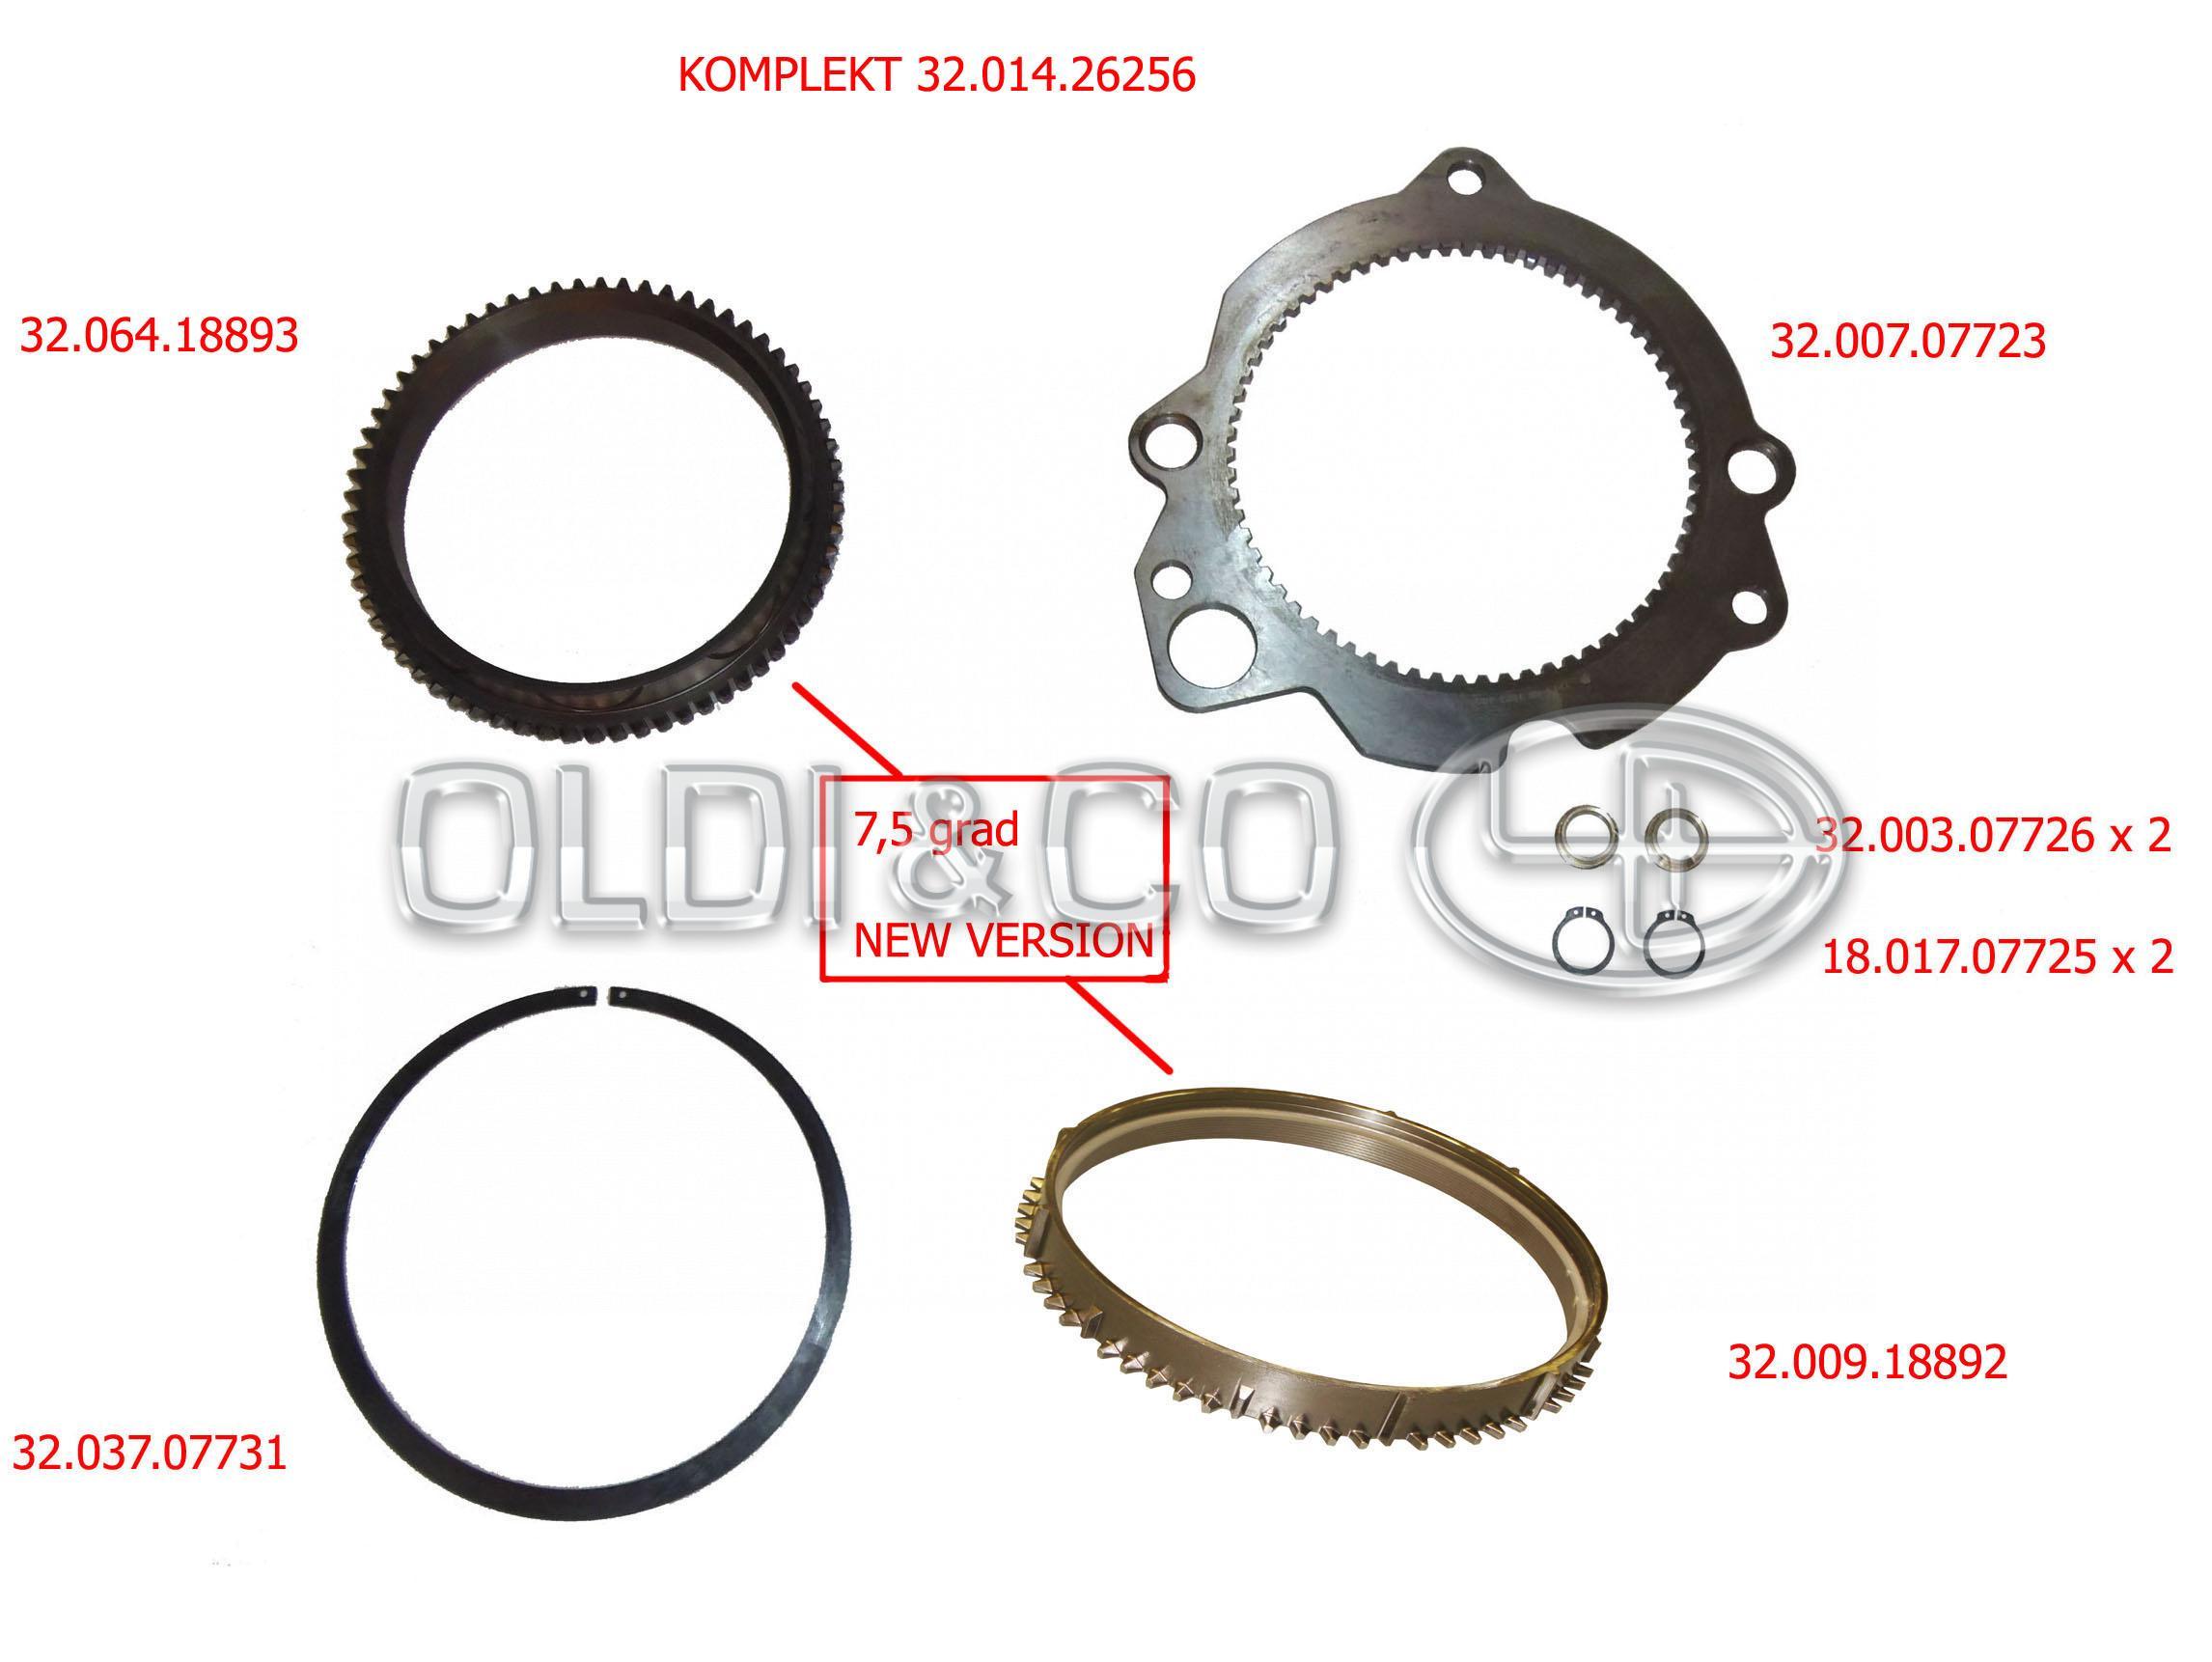 32.014.26256 Transmission parts → Gearbox gear kit